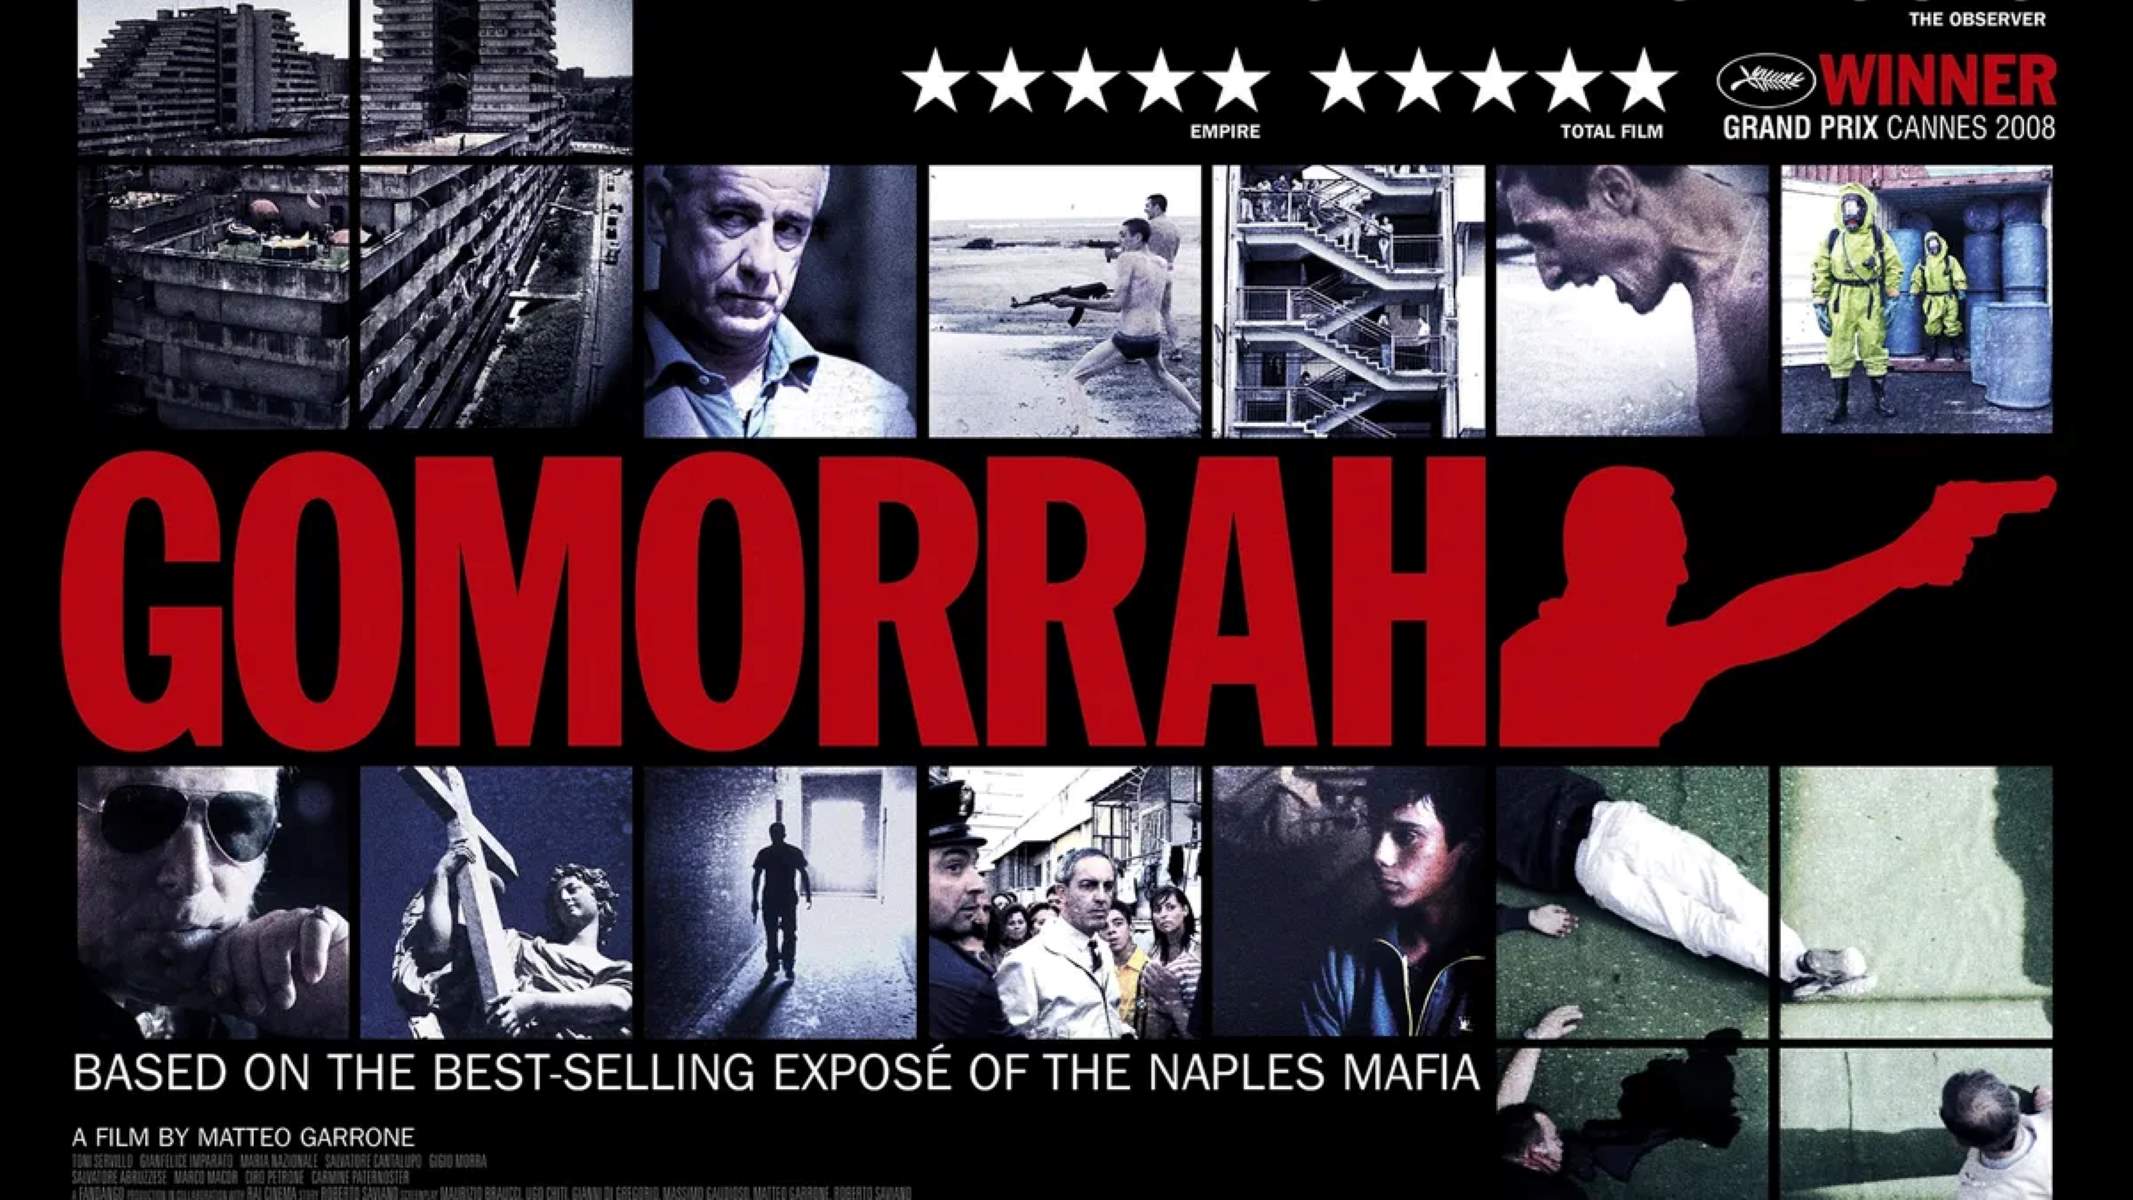 44-facts-about-the-movie-gomorrah